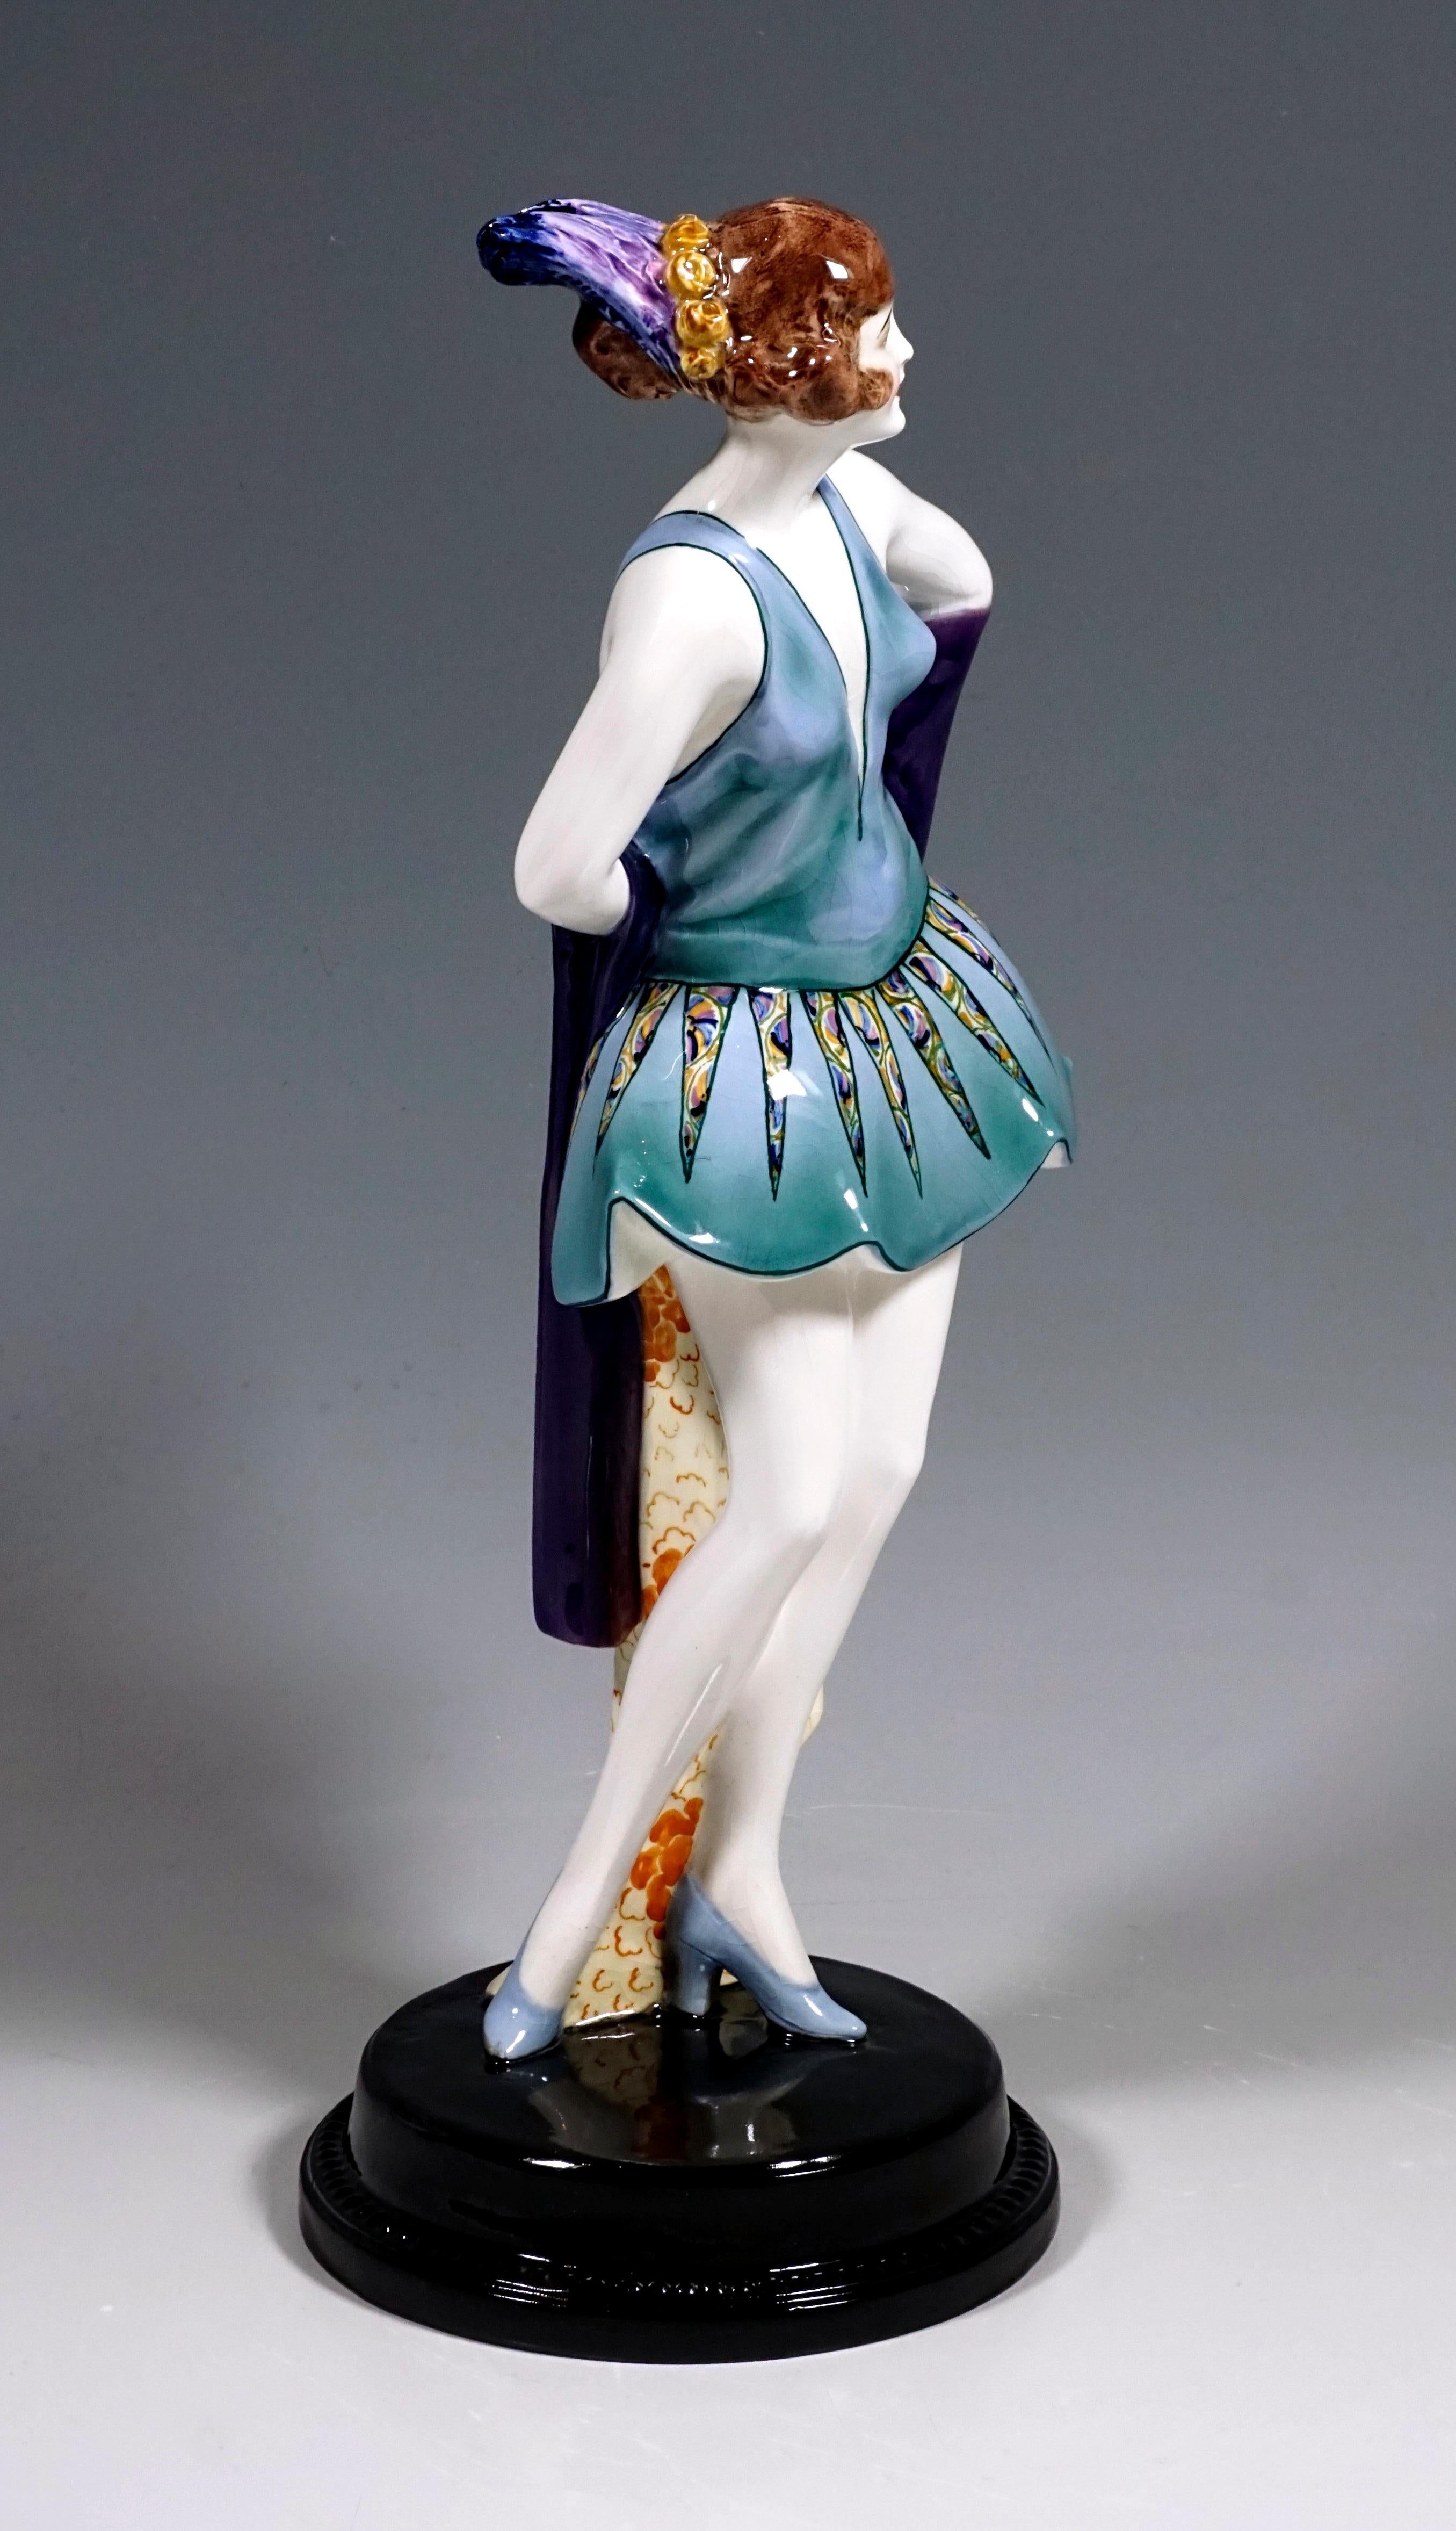 Rare Art Deco Goldscheider ceramics figurine
The dancer wears a blue-green dance dress cut low in front and at the back with a wide, short skirt with a long, pointed zigzag pattern, her brown hair pinned up with a flower ring and feather headdress.